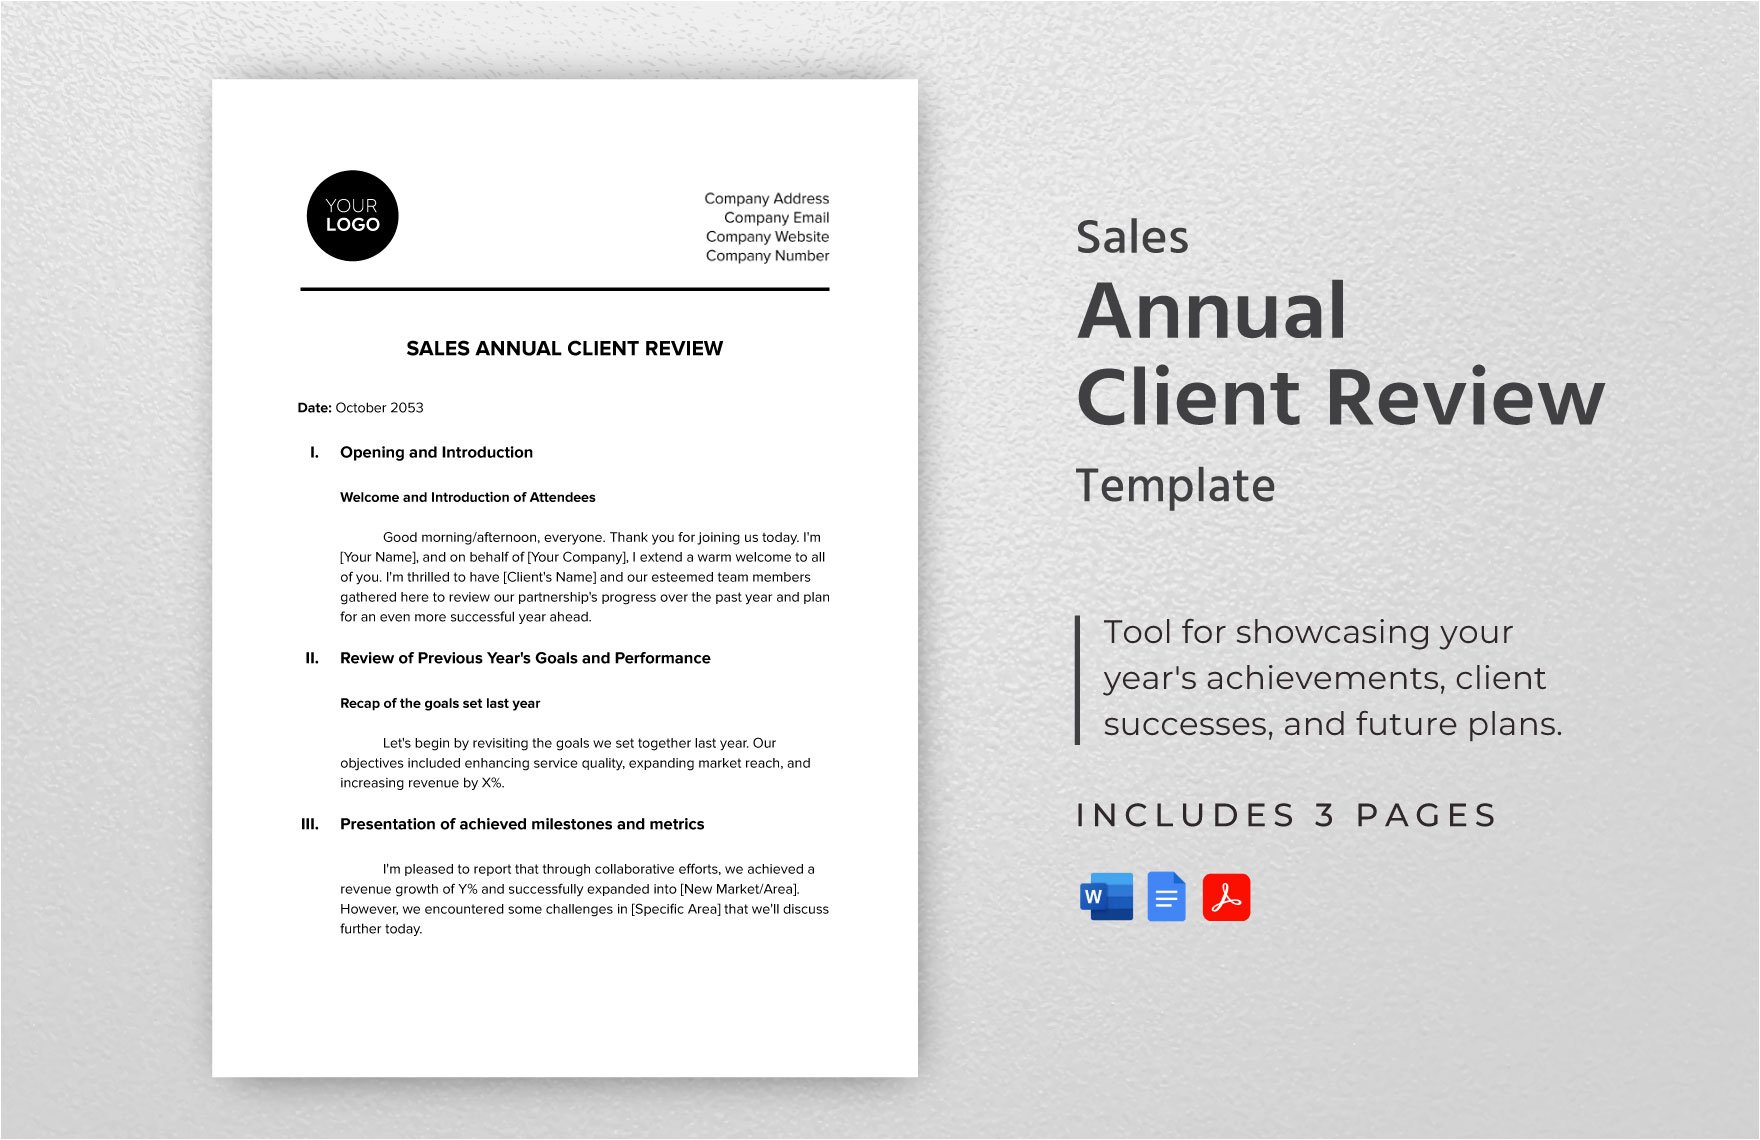 Sales Annual Client Review Template in Word, Google Docs, PDF